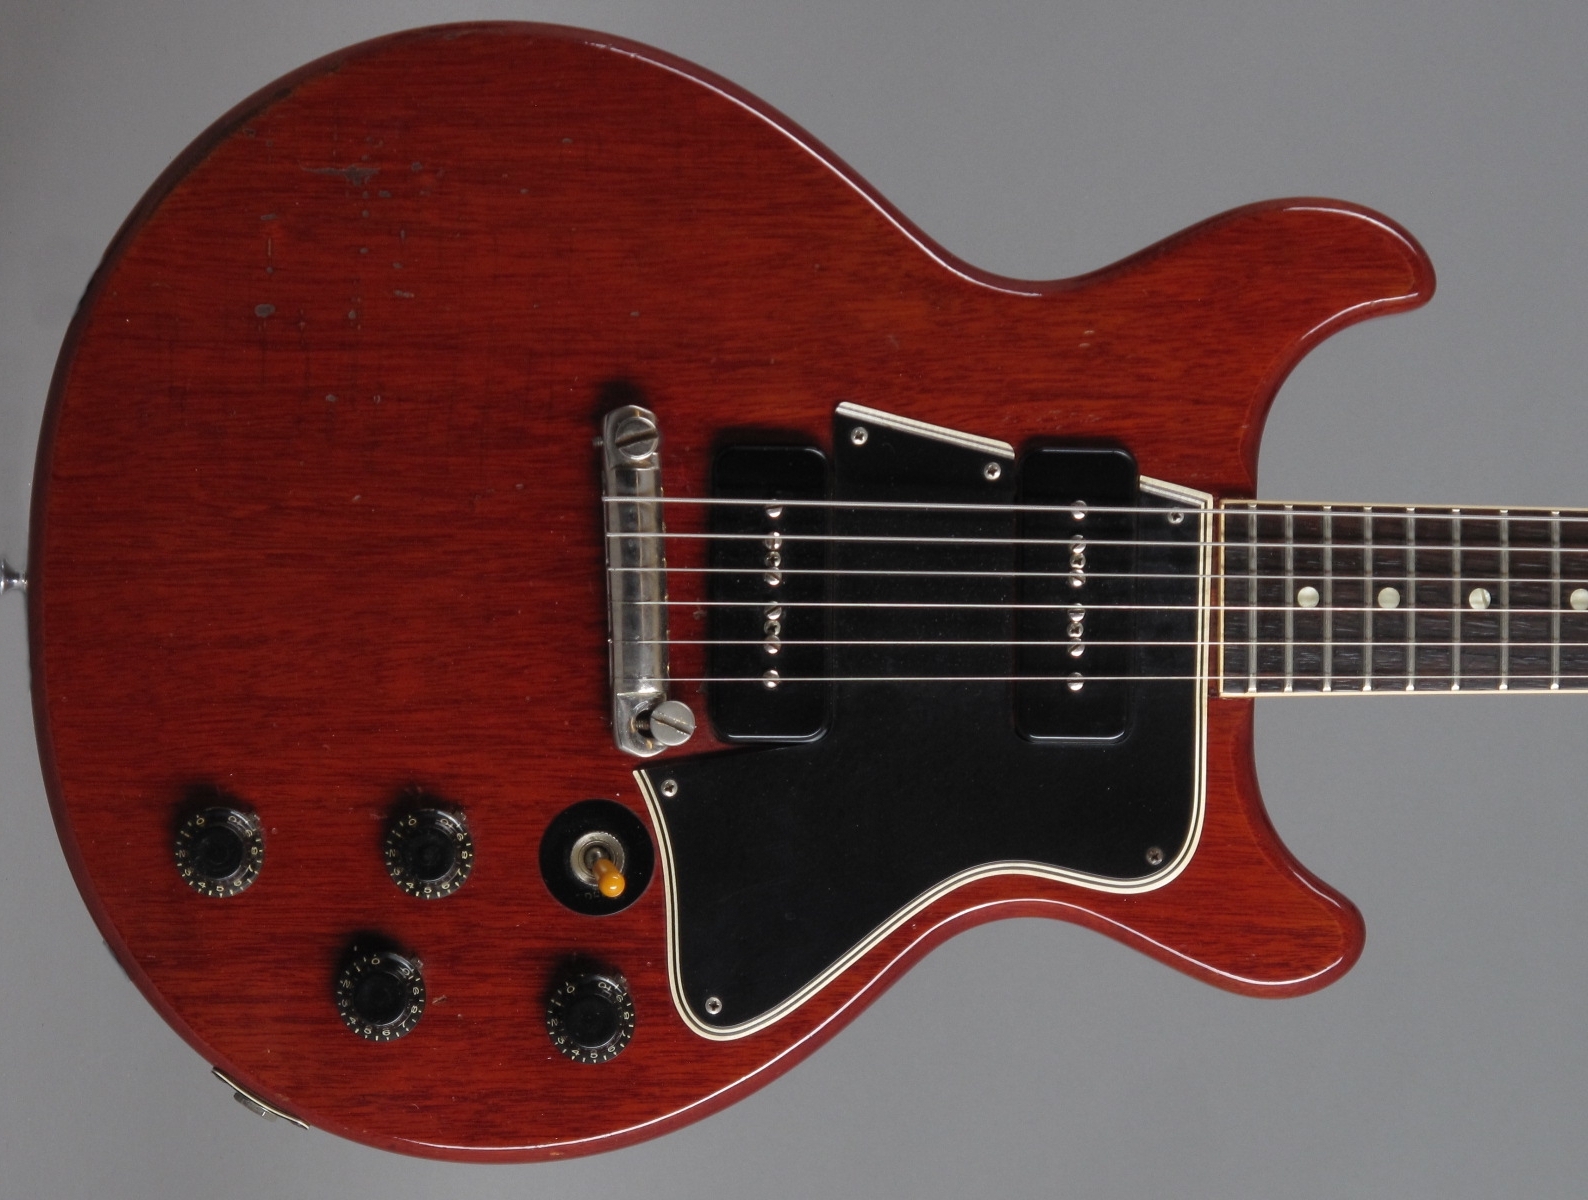 Gibson Les Paul Special DC 1960 Cherry Guitar For Sale GuitarPoint